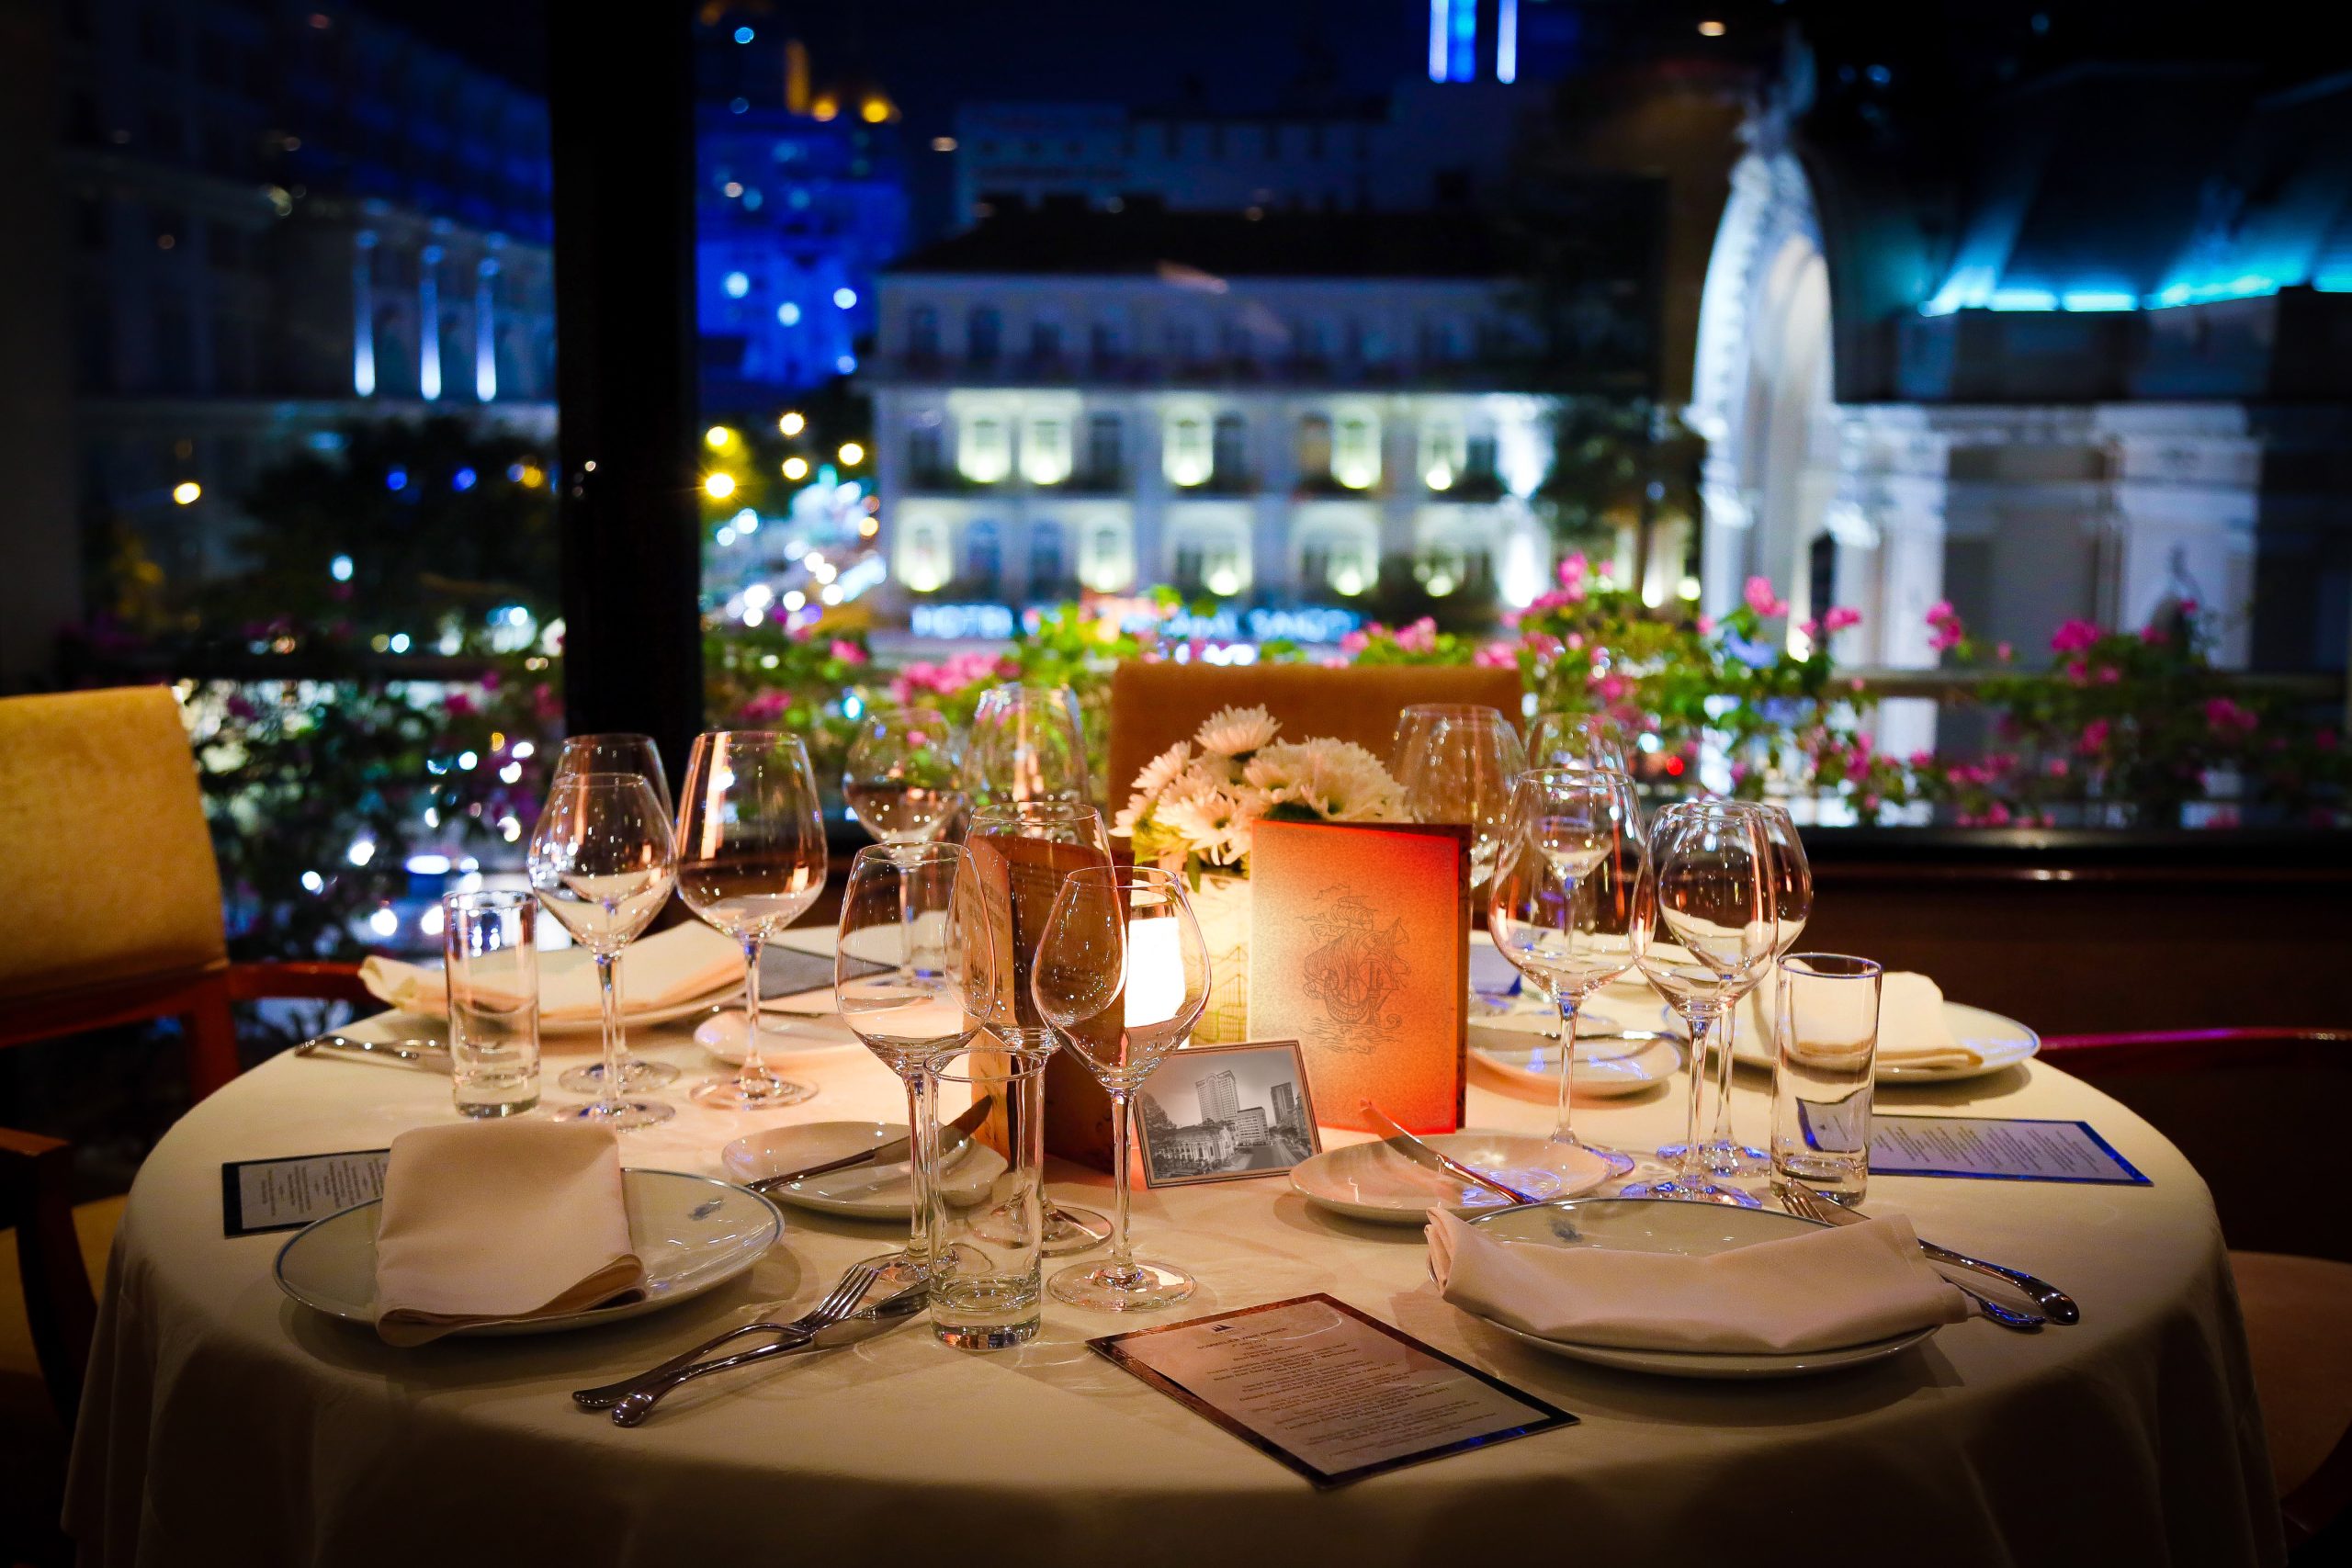 Reflections Restaurant is an ideal destination for romantic evenings in Saigon